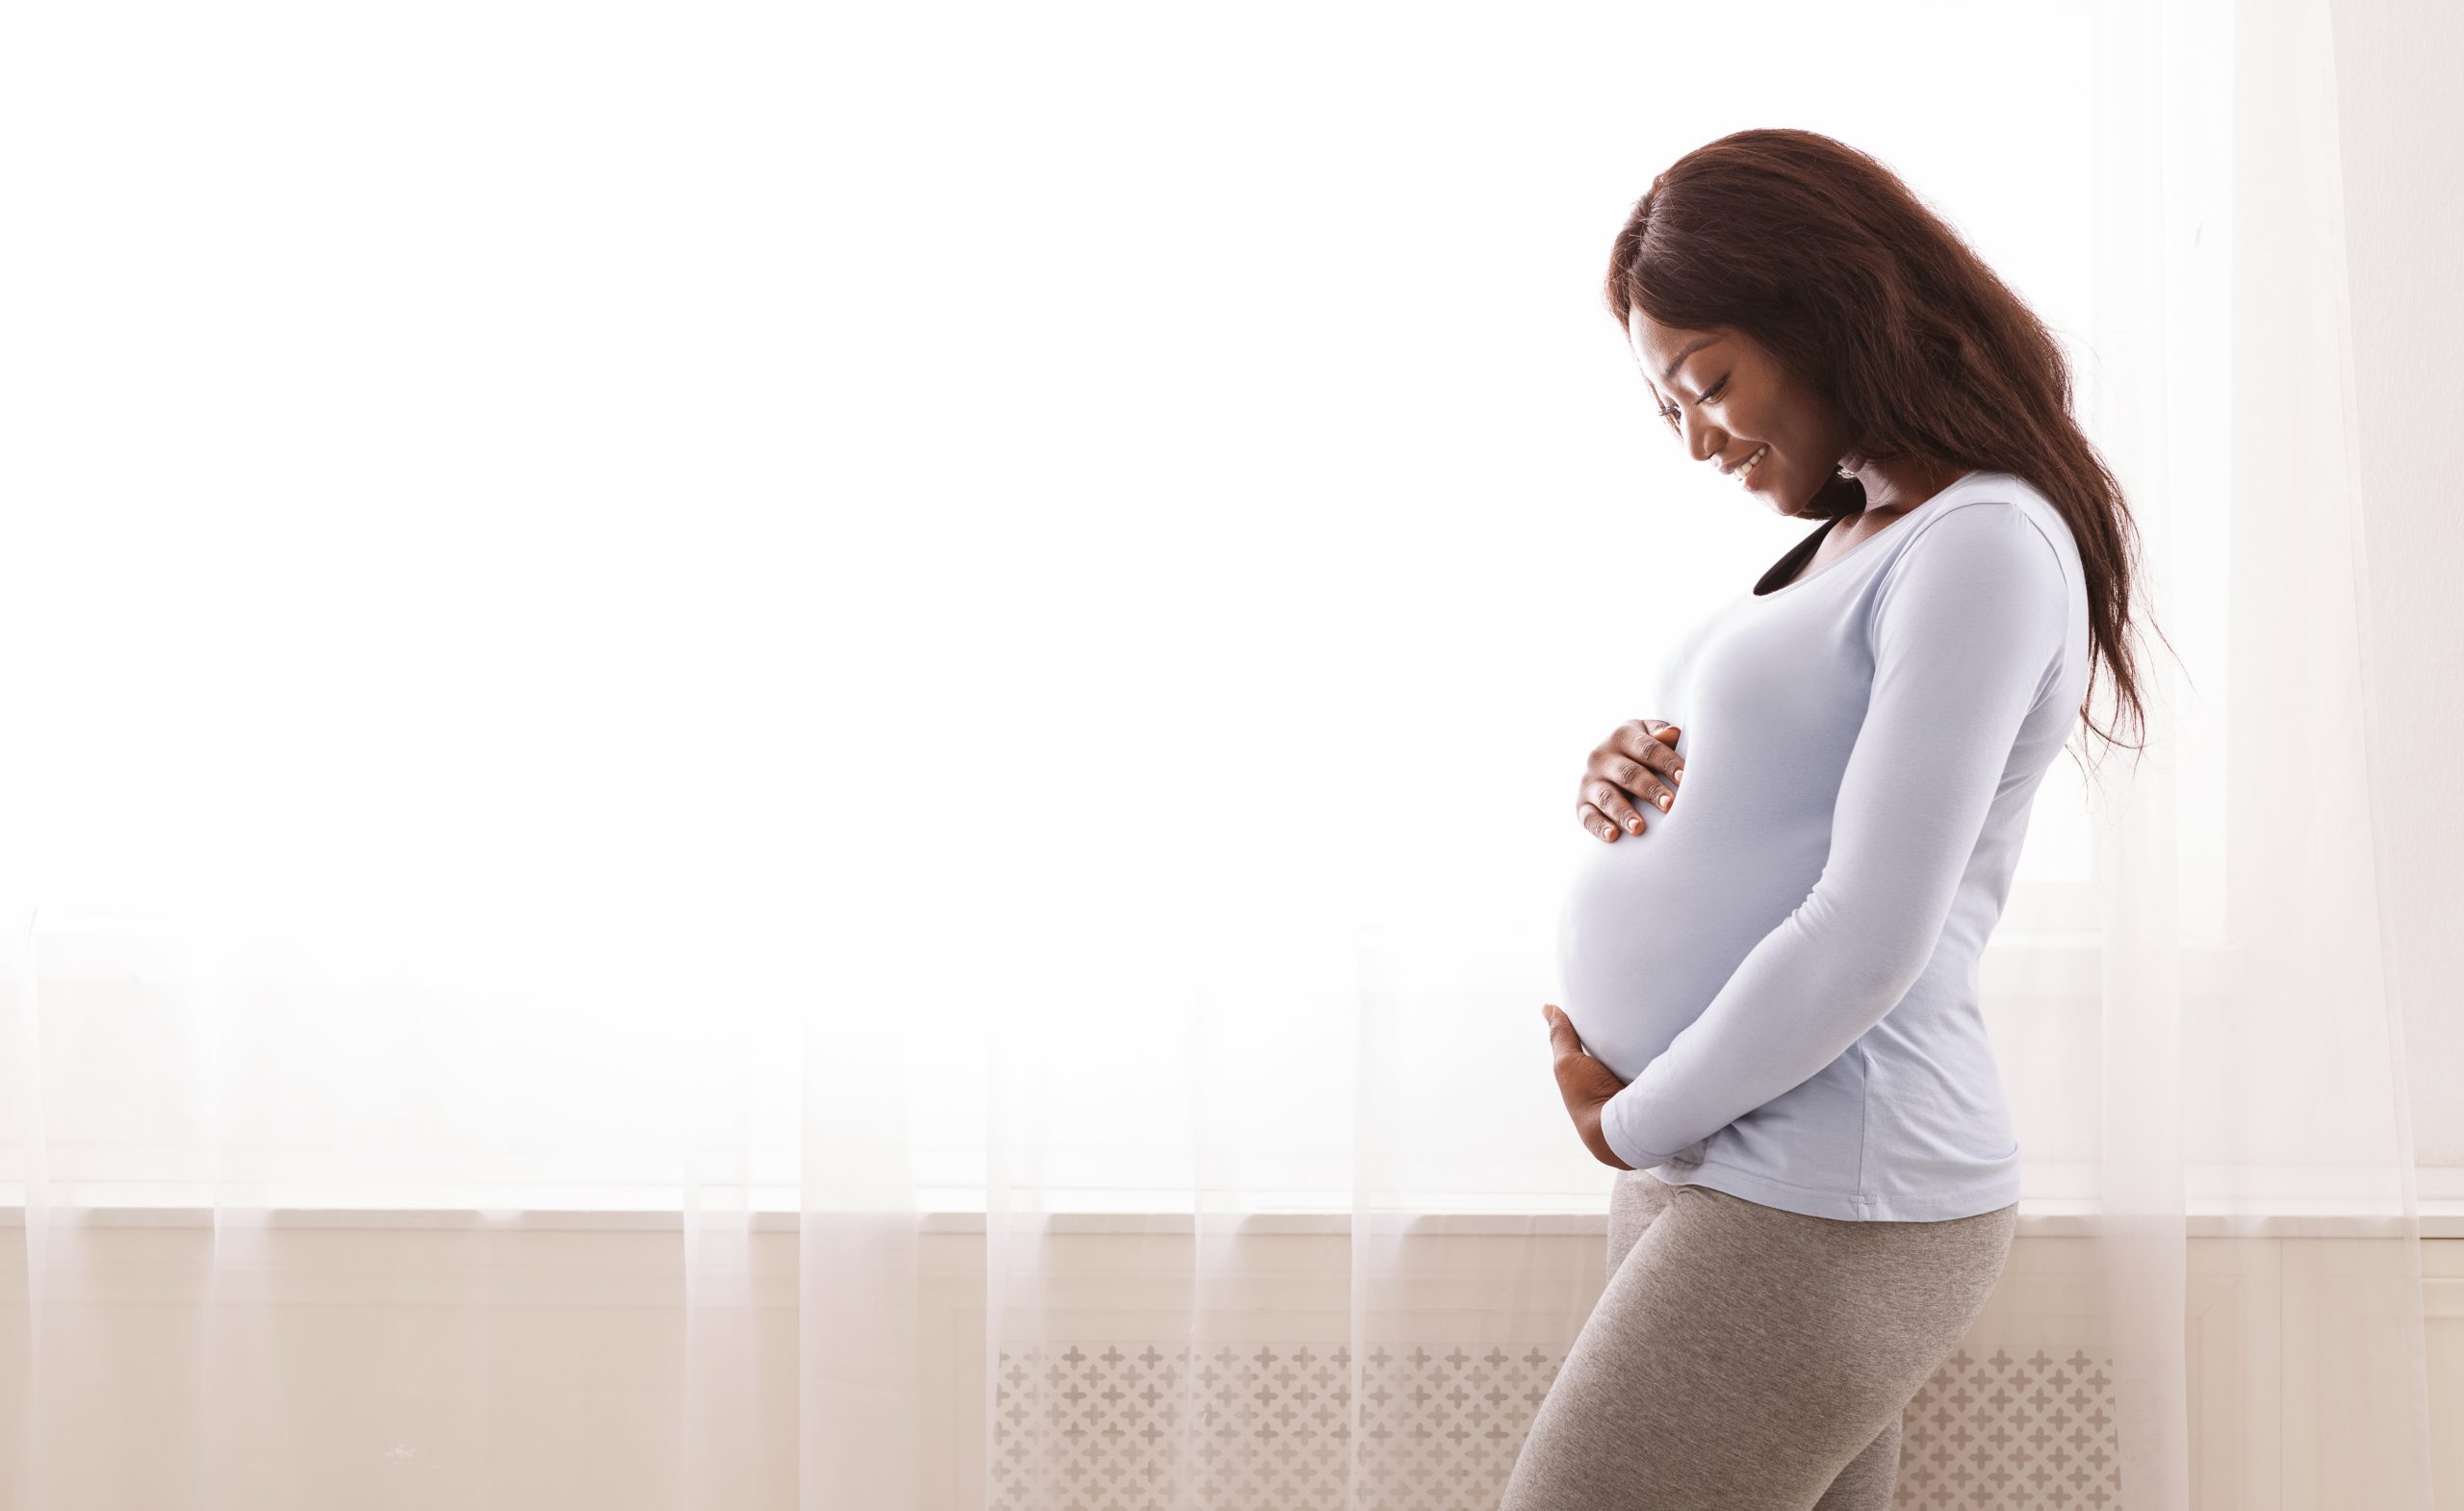 Everything You Need to Know About Becoming a Surrogate